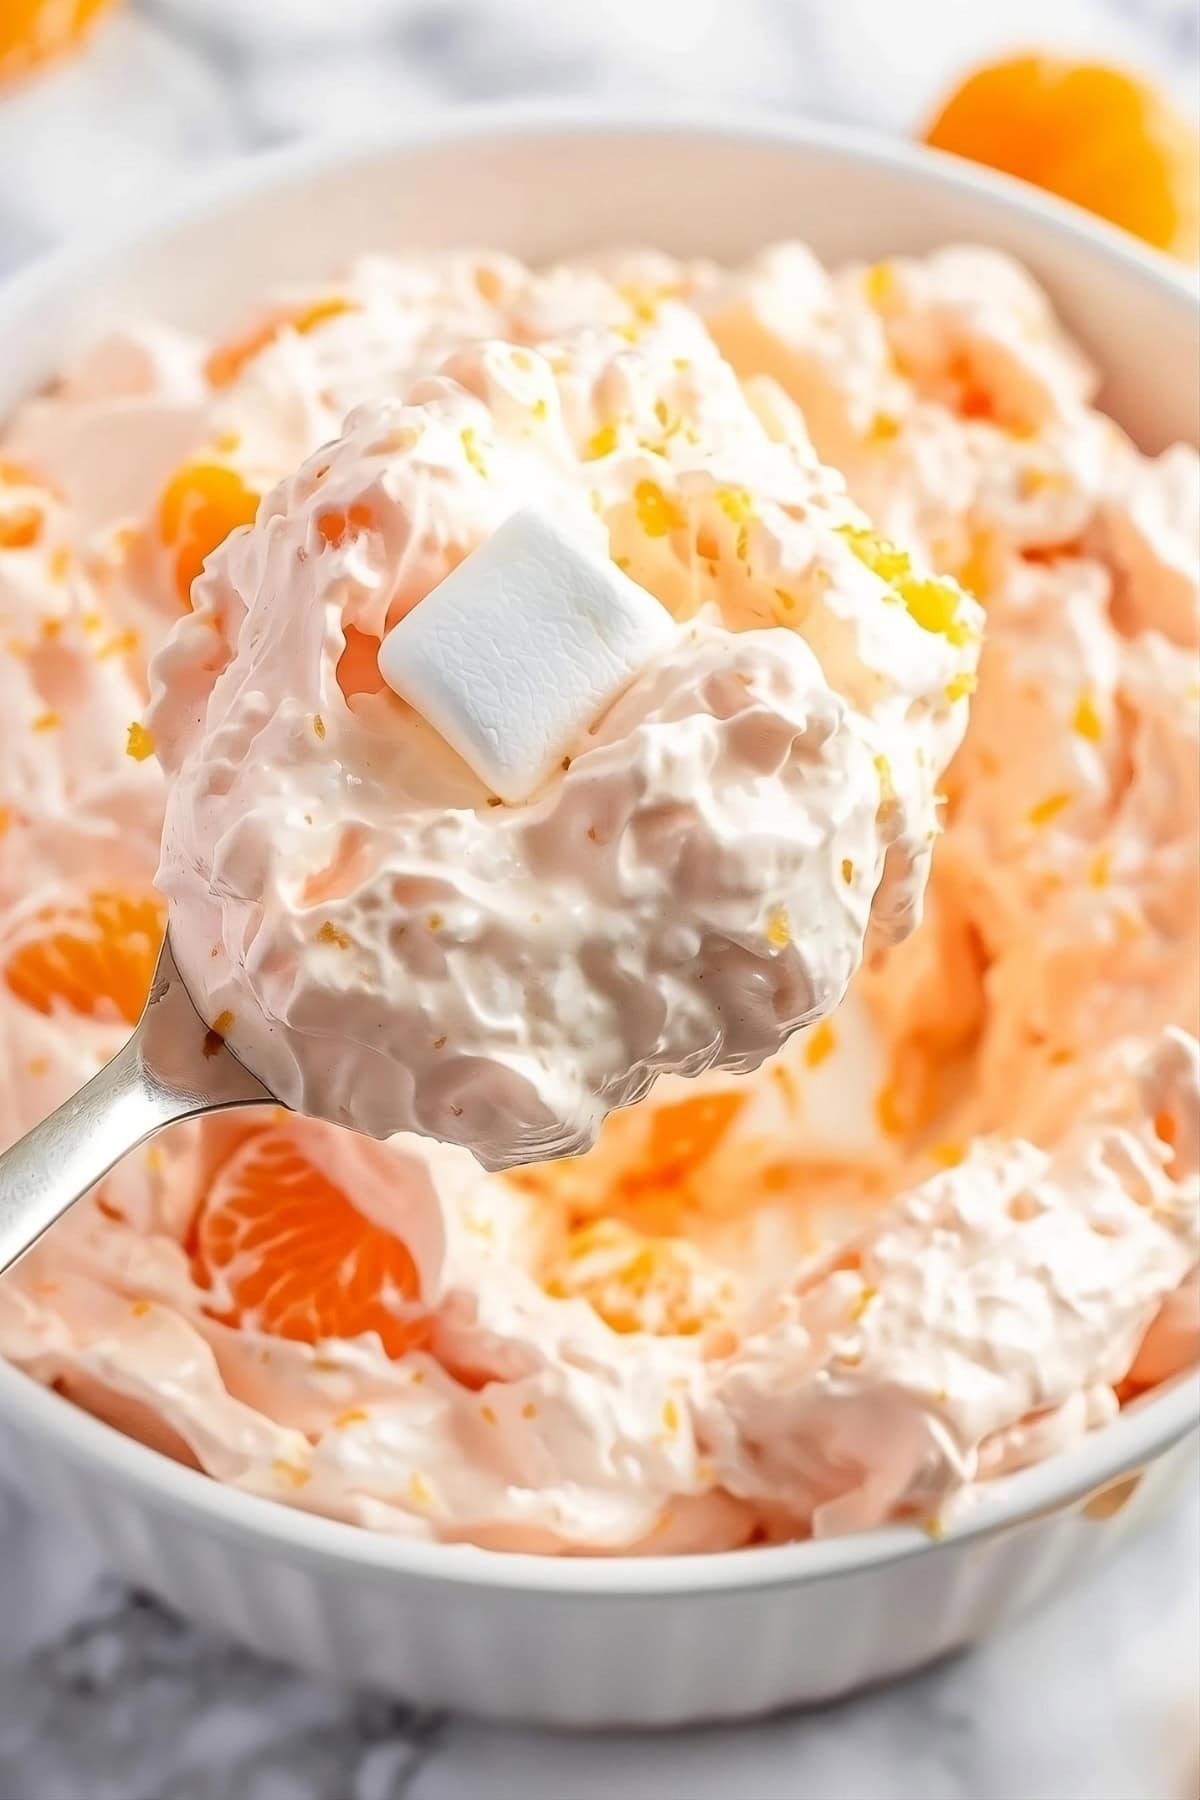 Closeup of spoonful of orange fluff salad from a white bowl.